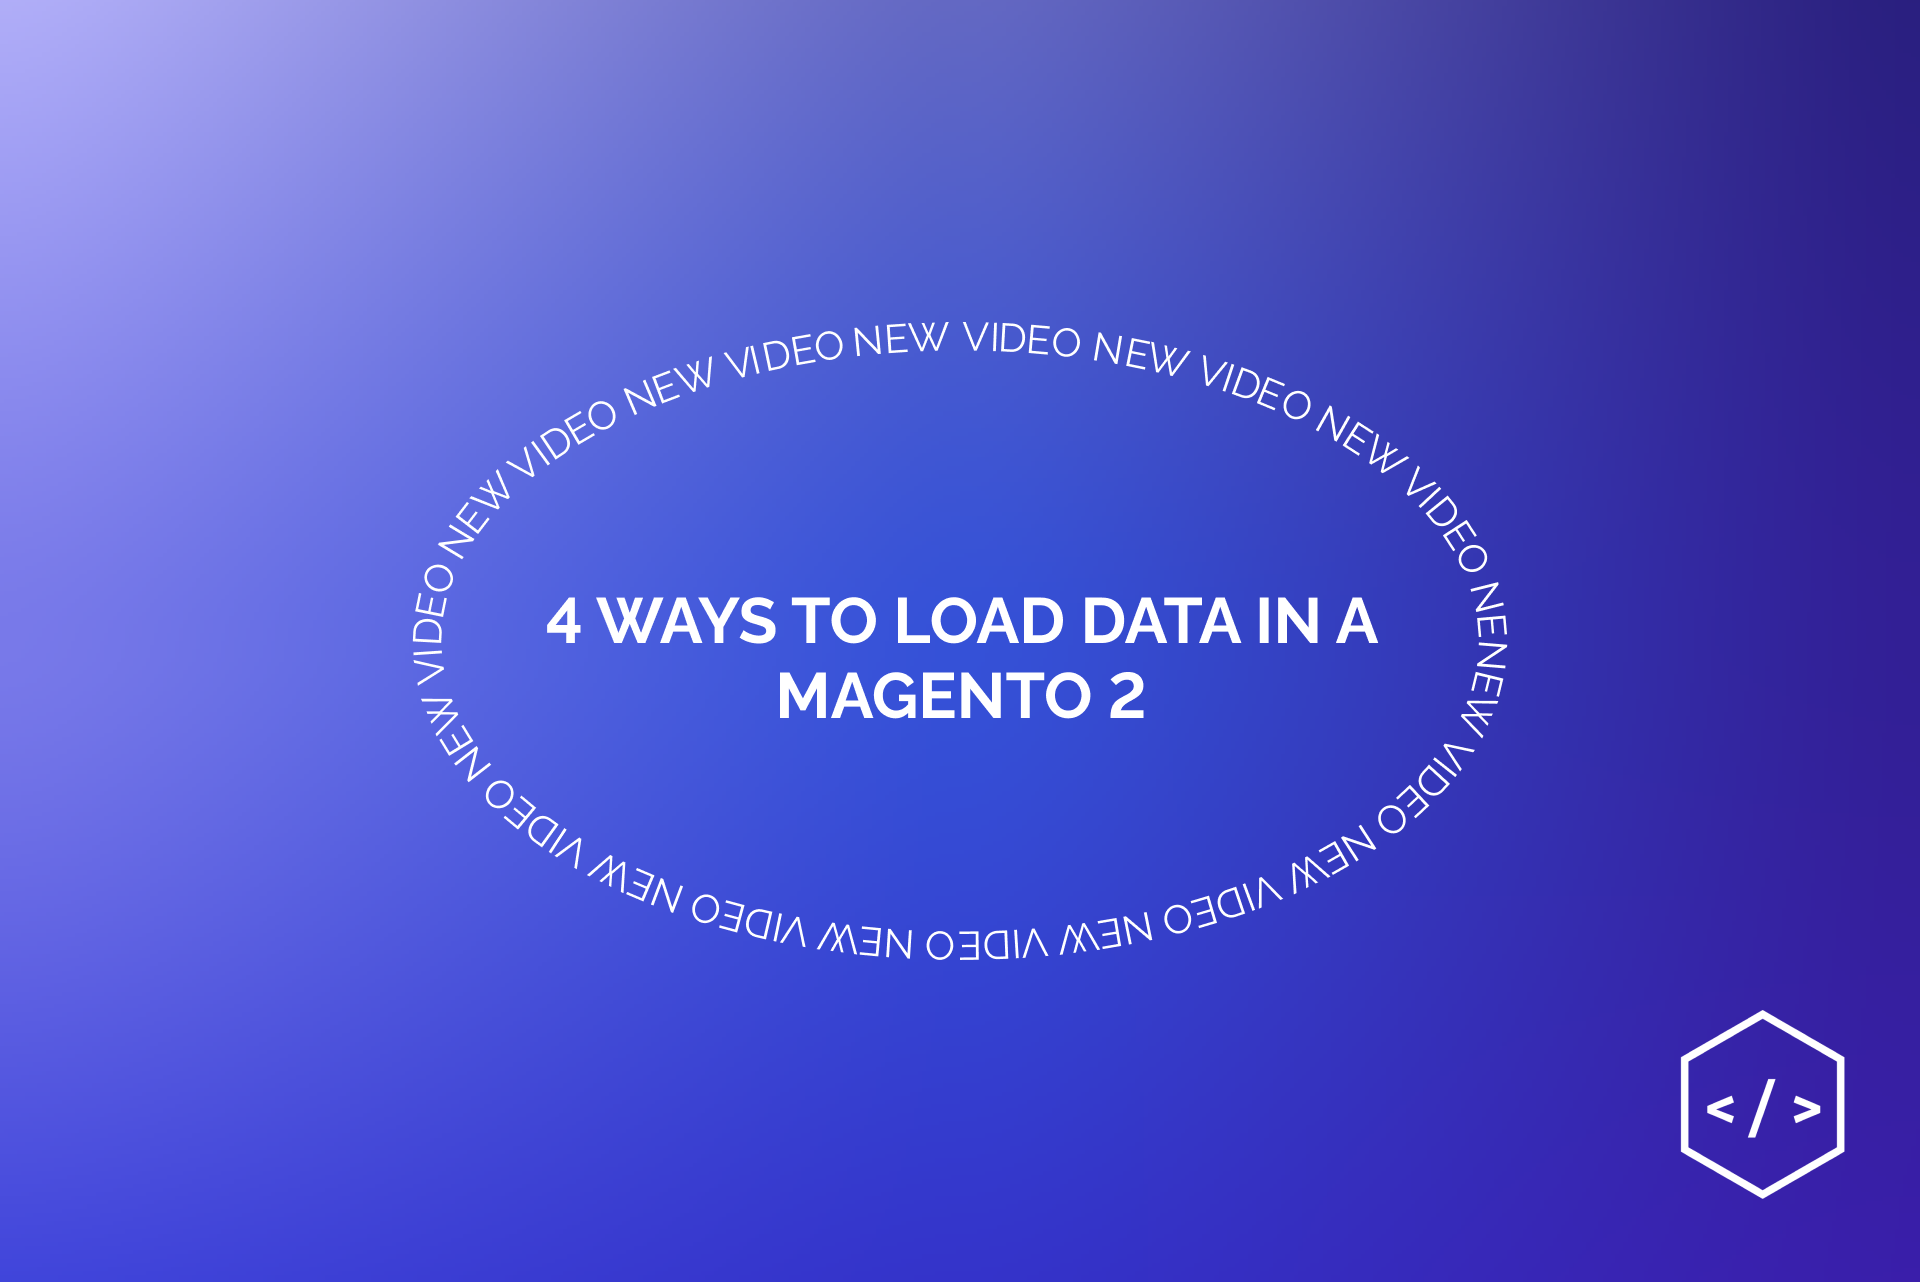 How to load data in a Magento 2?